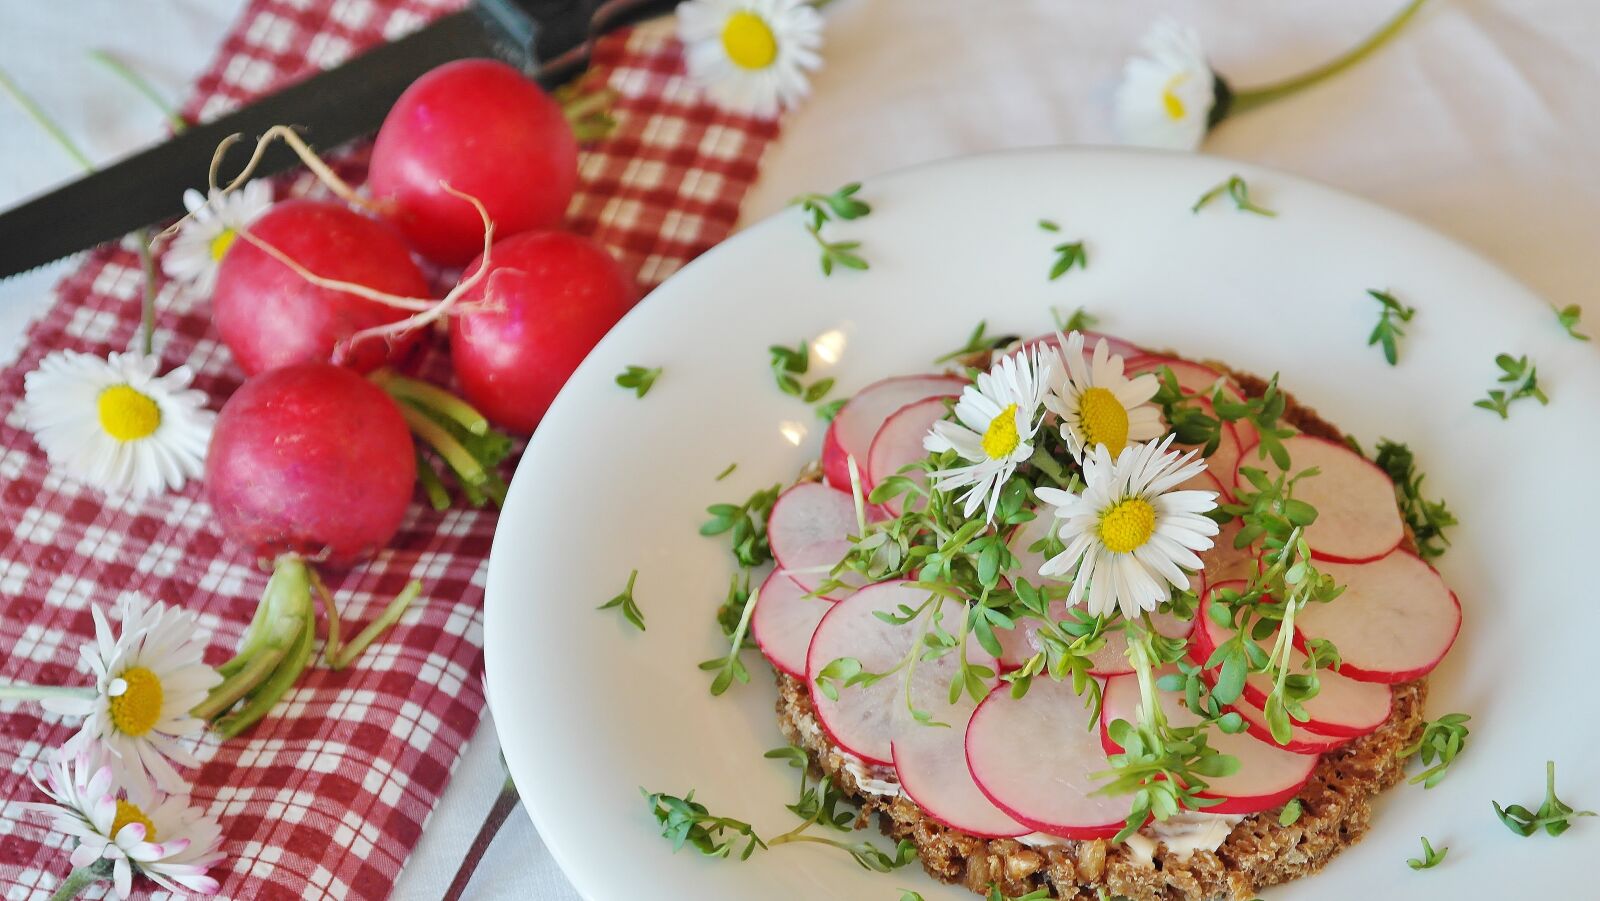 Samsung NX20 sample photo. Radishes, bread, bread and photography